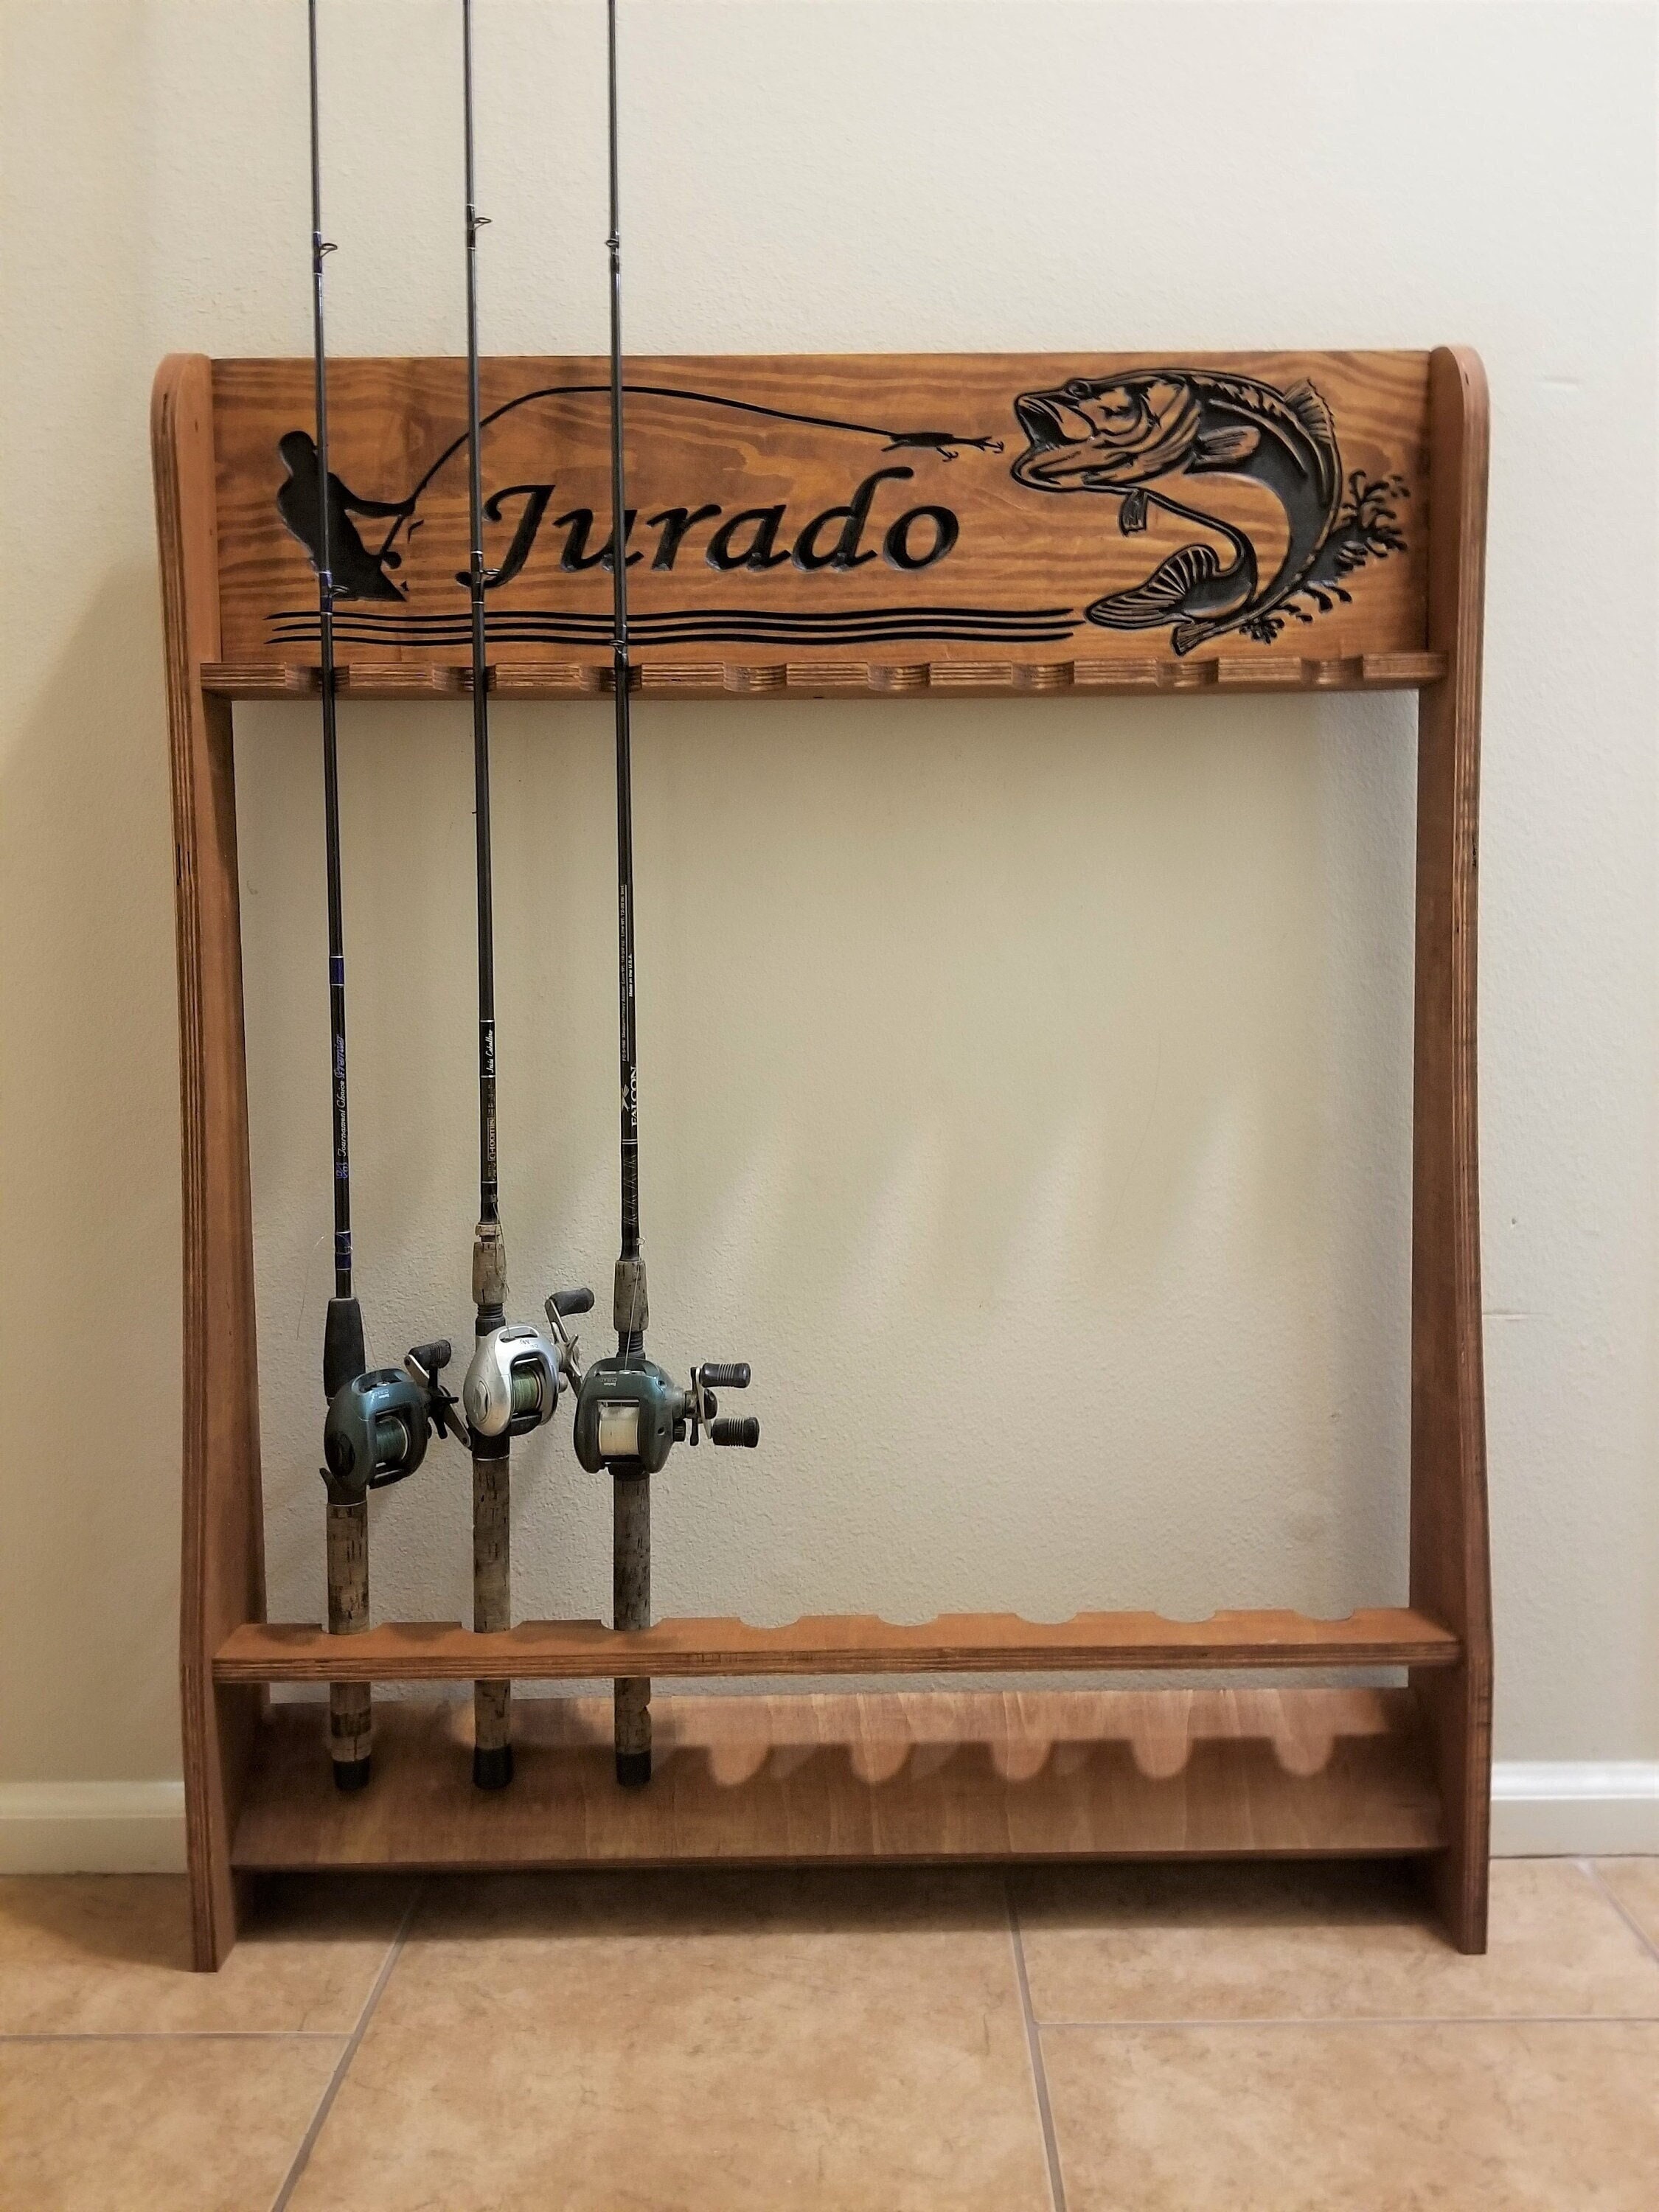 Wall Mount Fishing Pole Holder - Can TOTALLY DIY with pallet wood